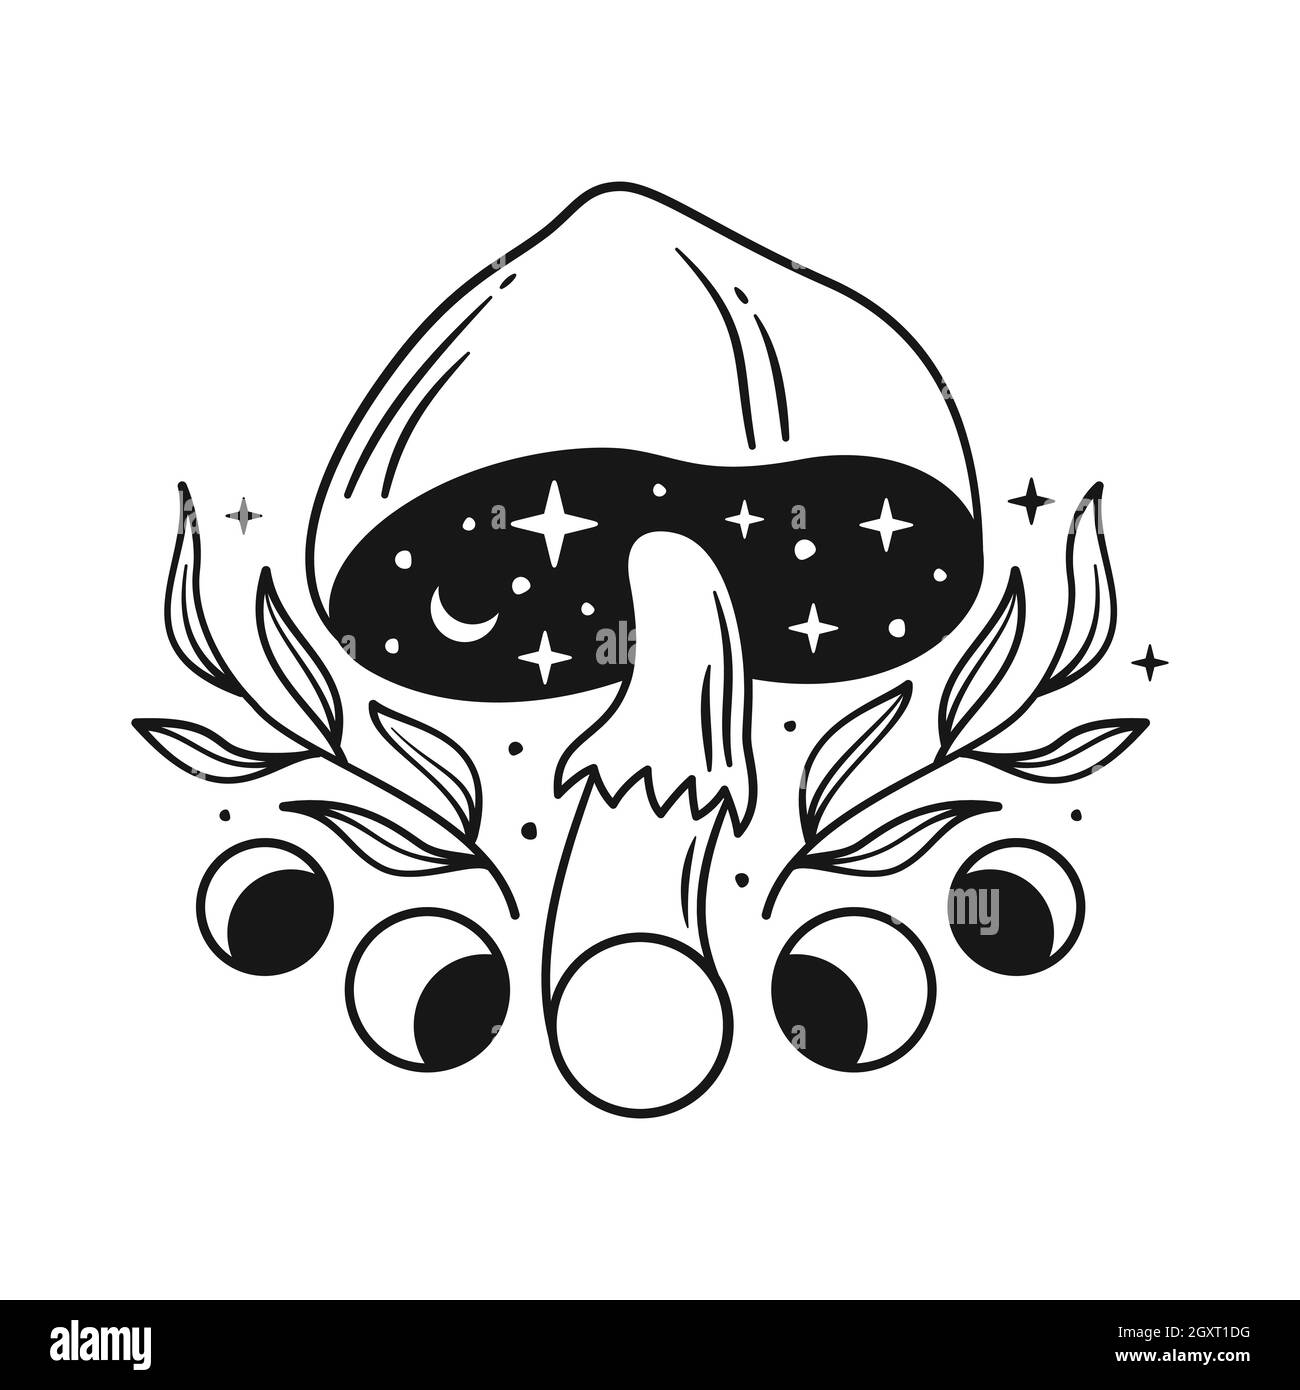 Black and white illustrations with magic mushroom and moon phases. Stock Vector